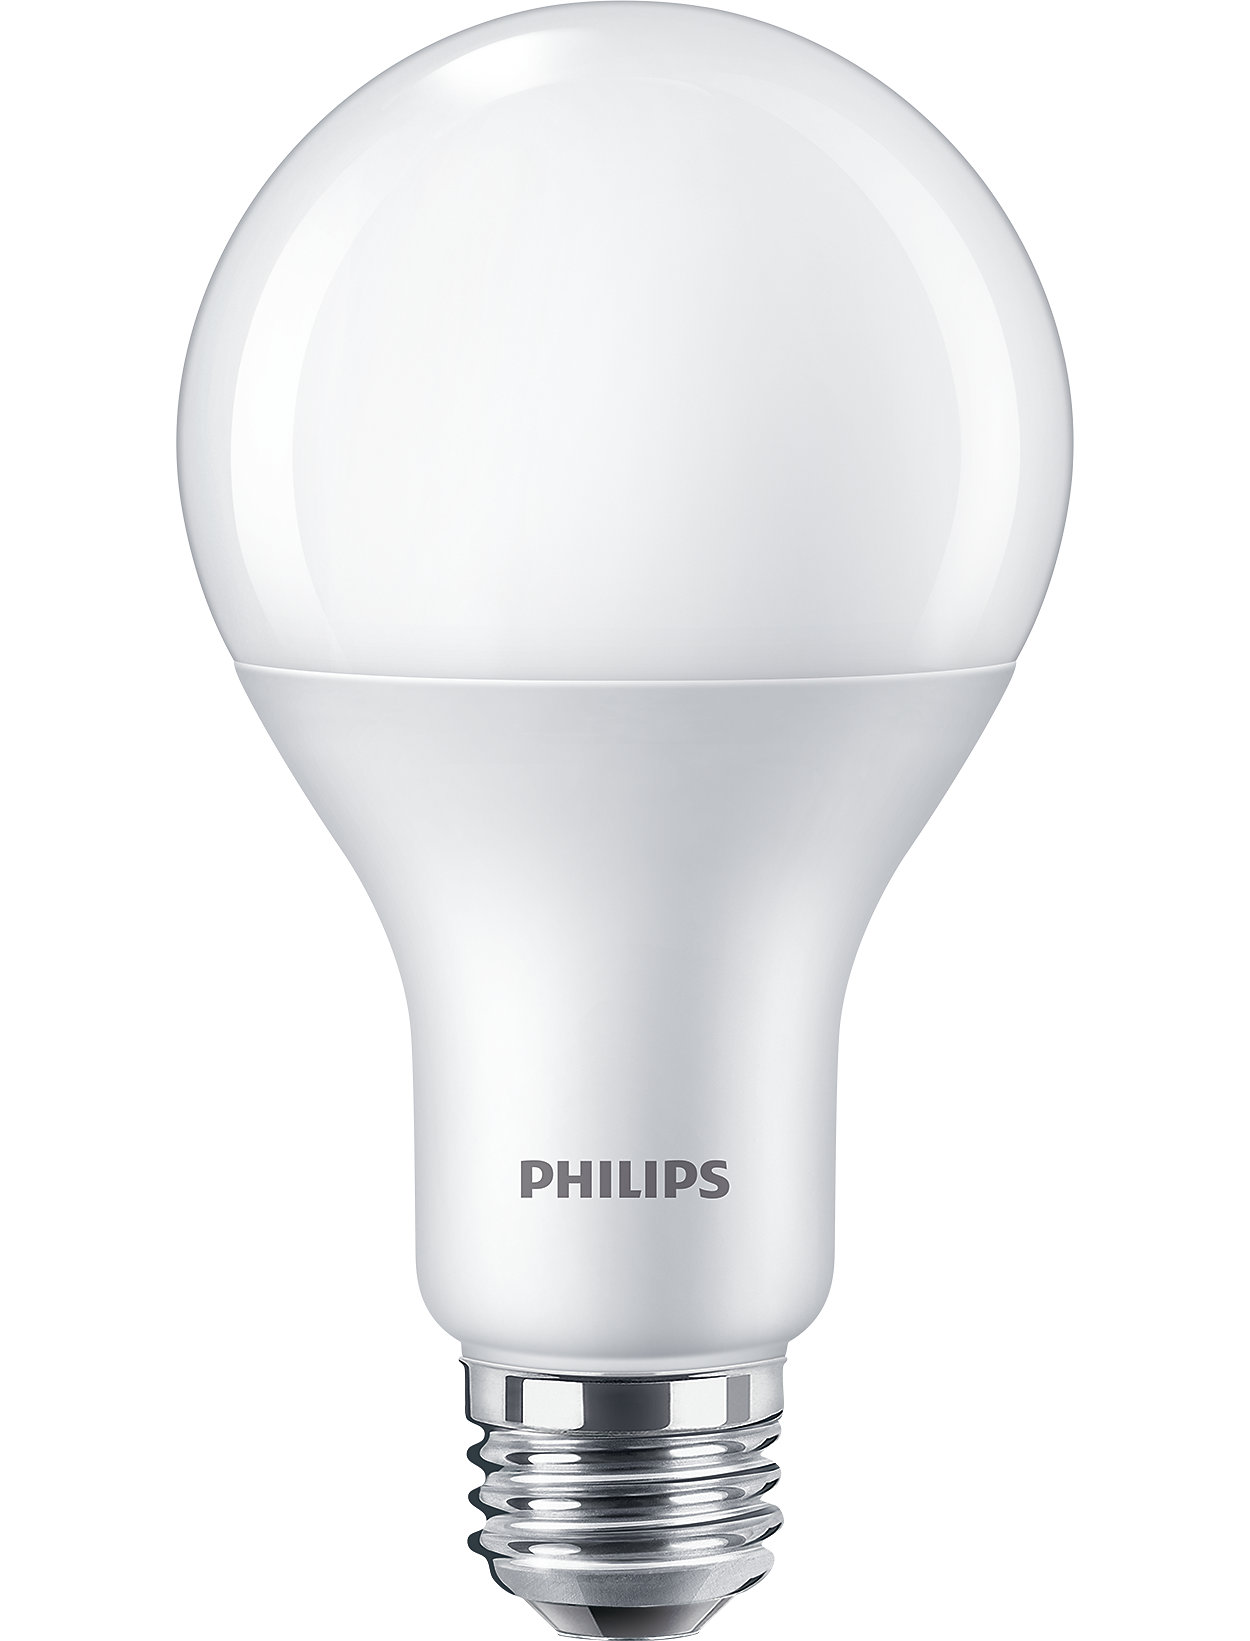 Attractive, dimmable LED alternative to popular incandescents.